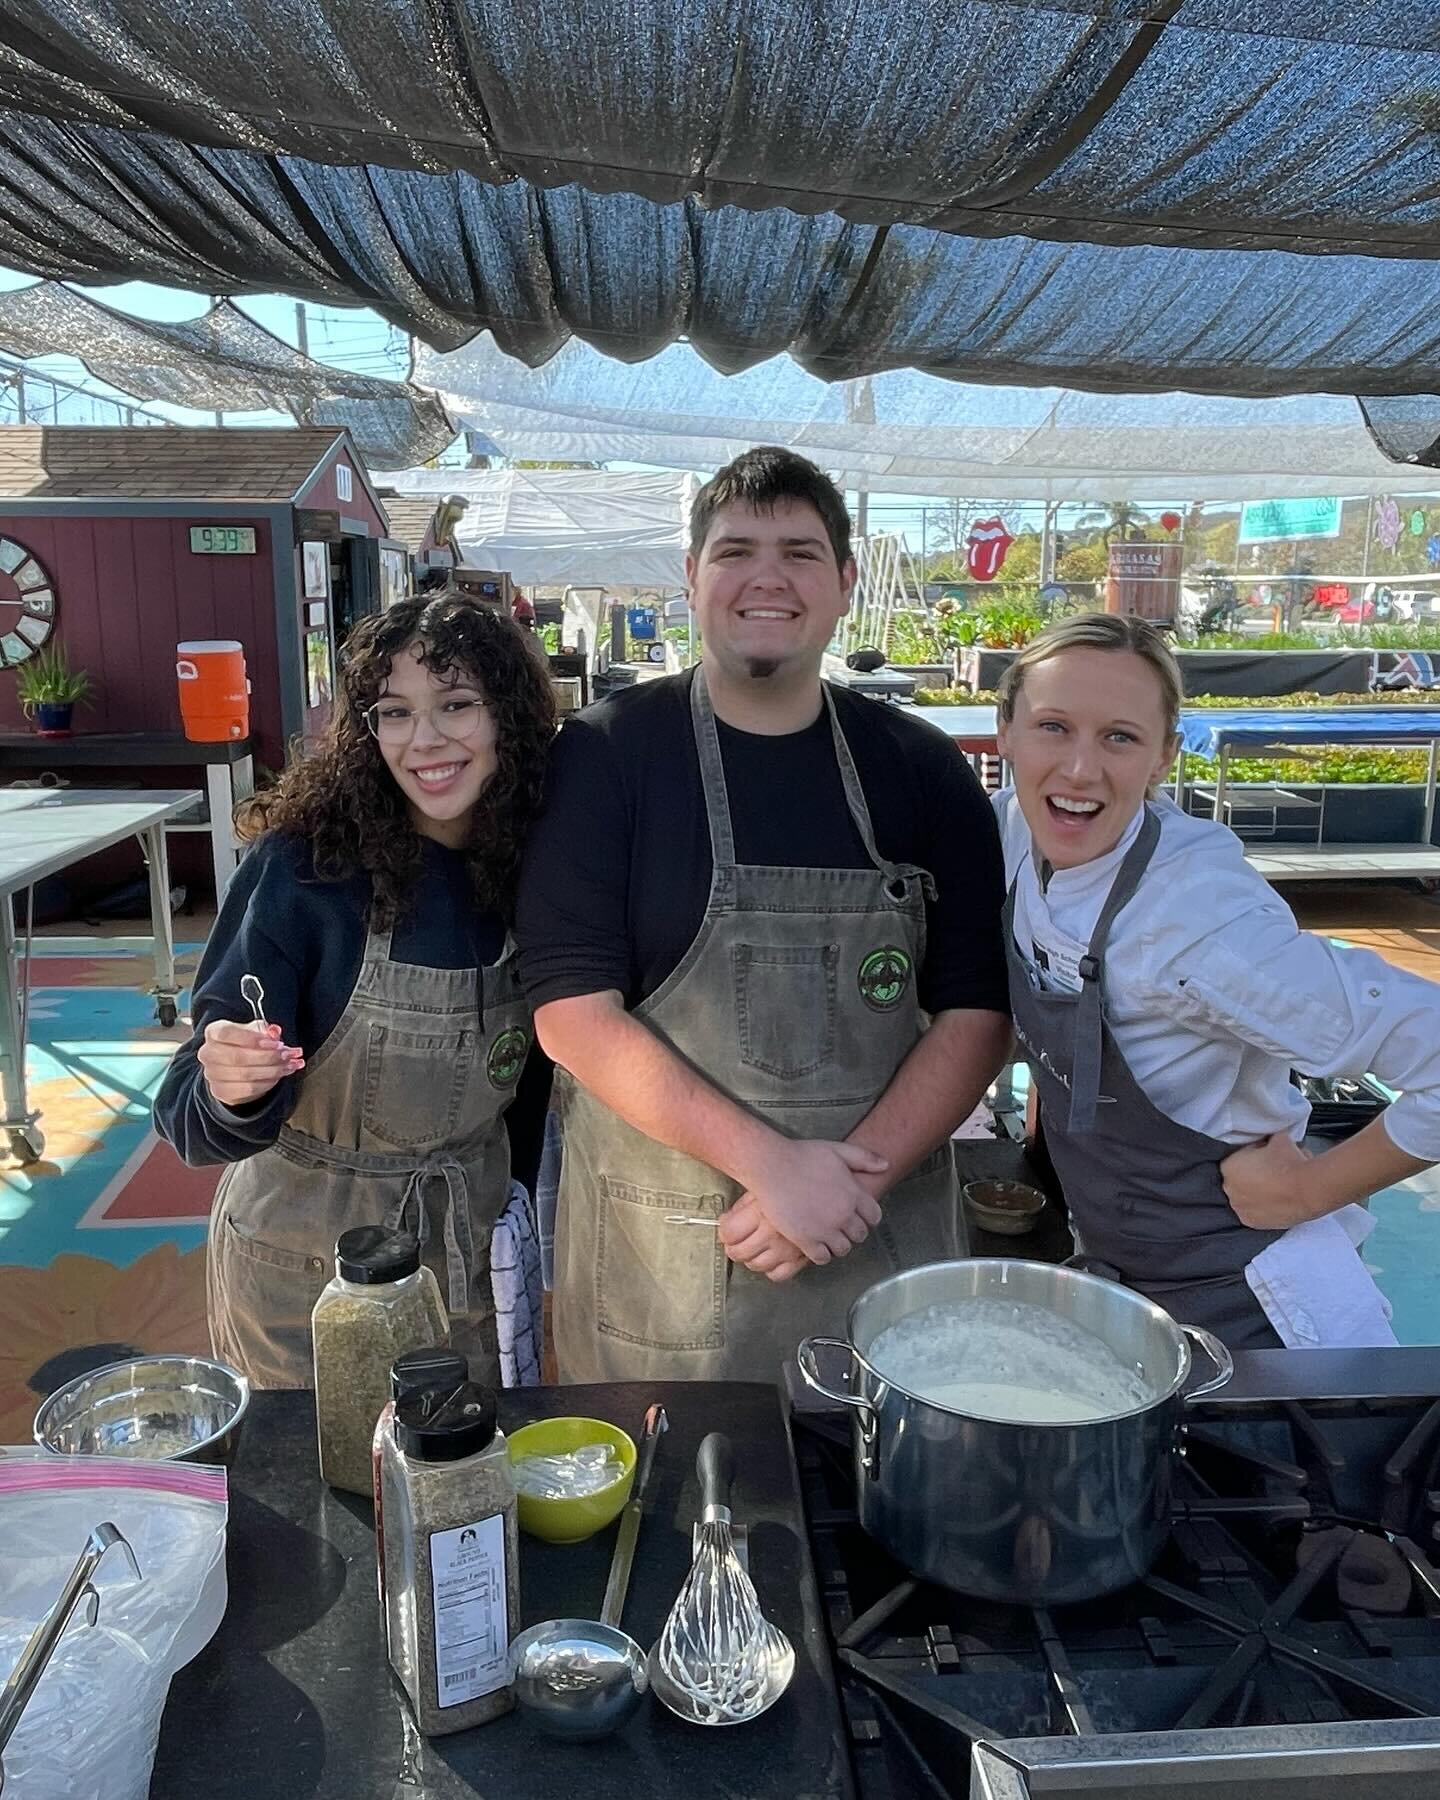 The Abraxas Garden Kitchen had a special guest chef this week&mdash;Eliza Martin-Daly, champion of Chopped! She taught us how to make homemade fettuccine and spaghettini. We were all in heaven after the first bite of either Alfredo or marinara sauce 